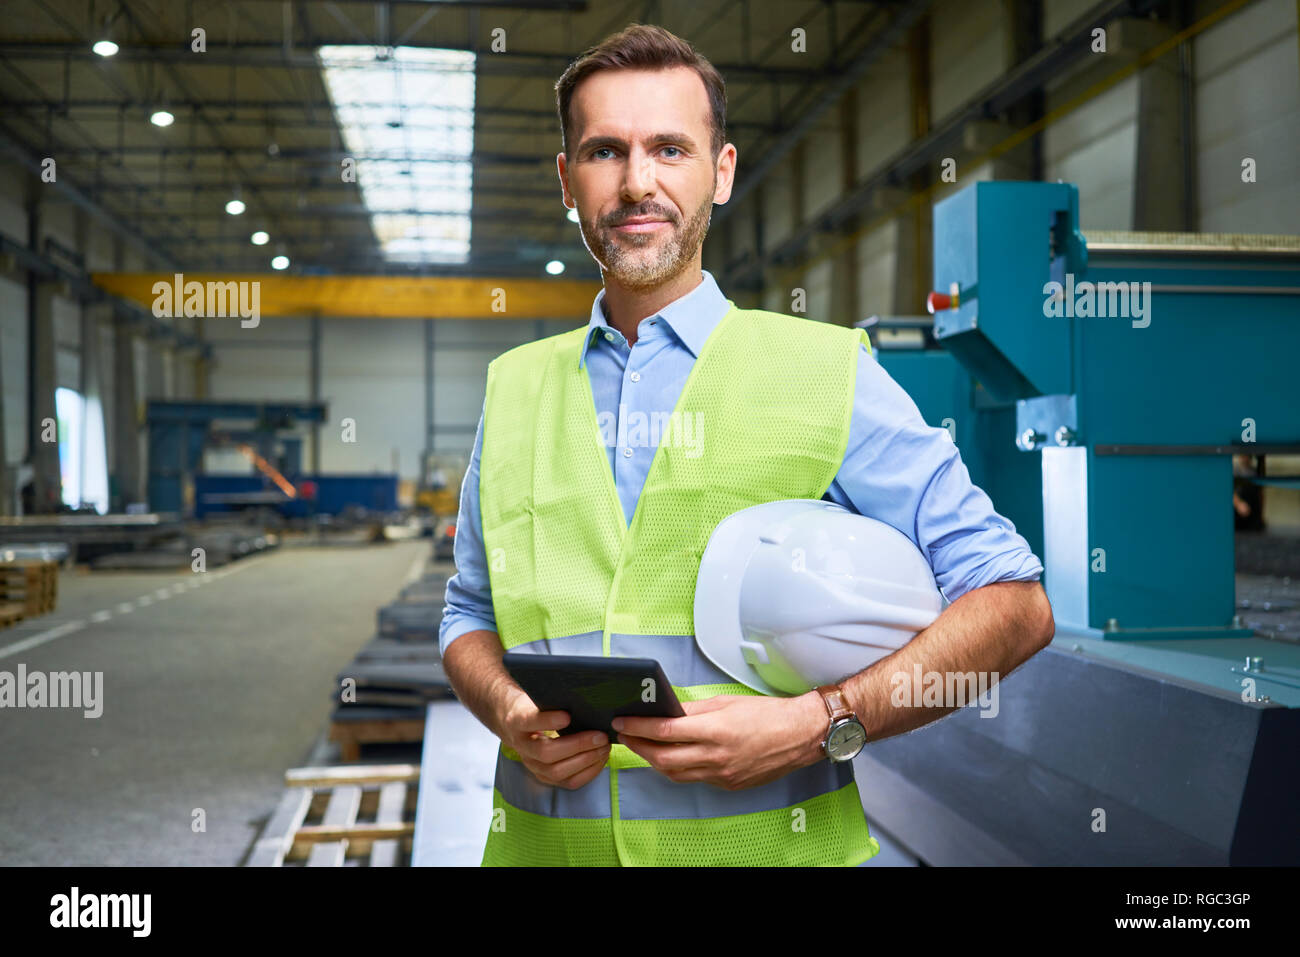 Portrait of confident man wearing shirt and safety vest in factory Stock Photo